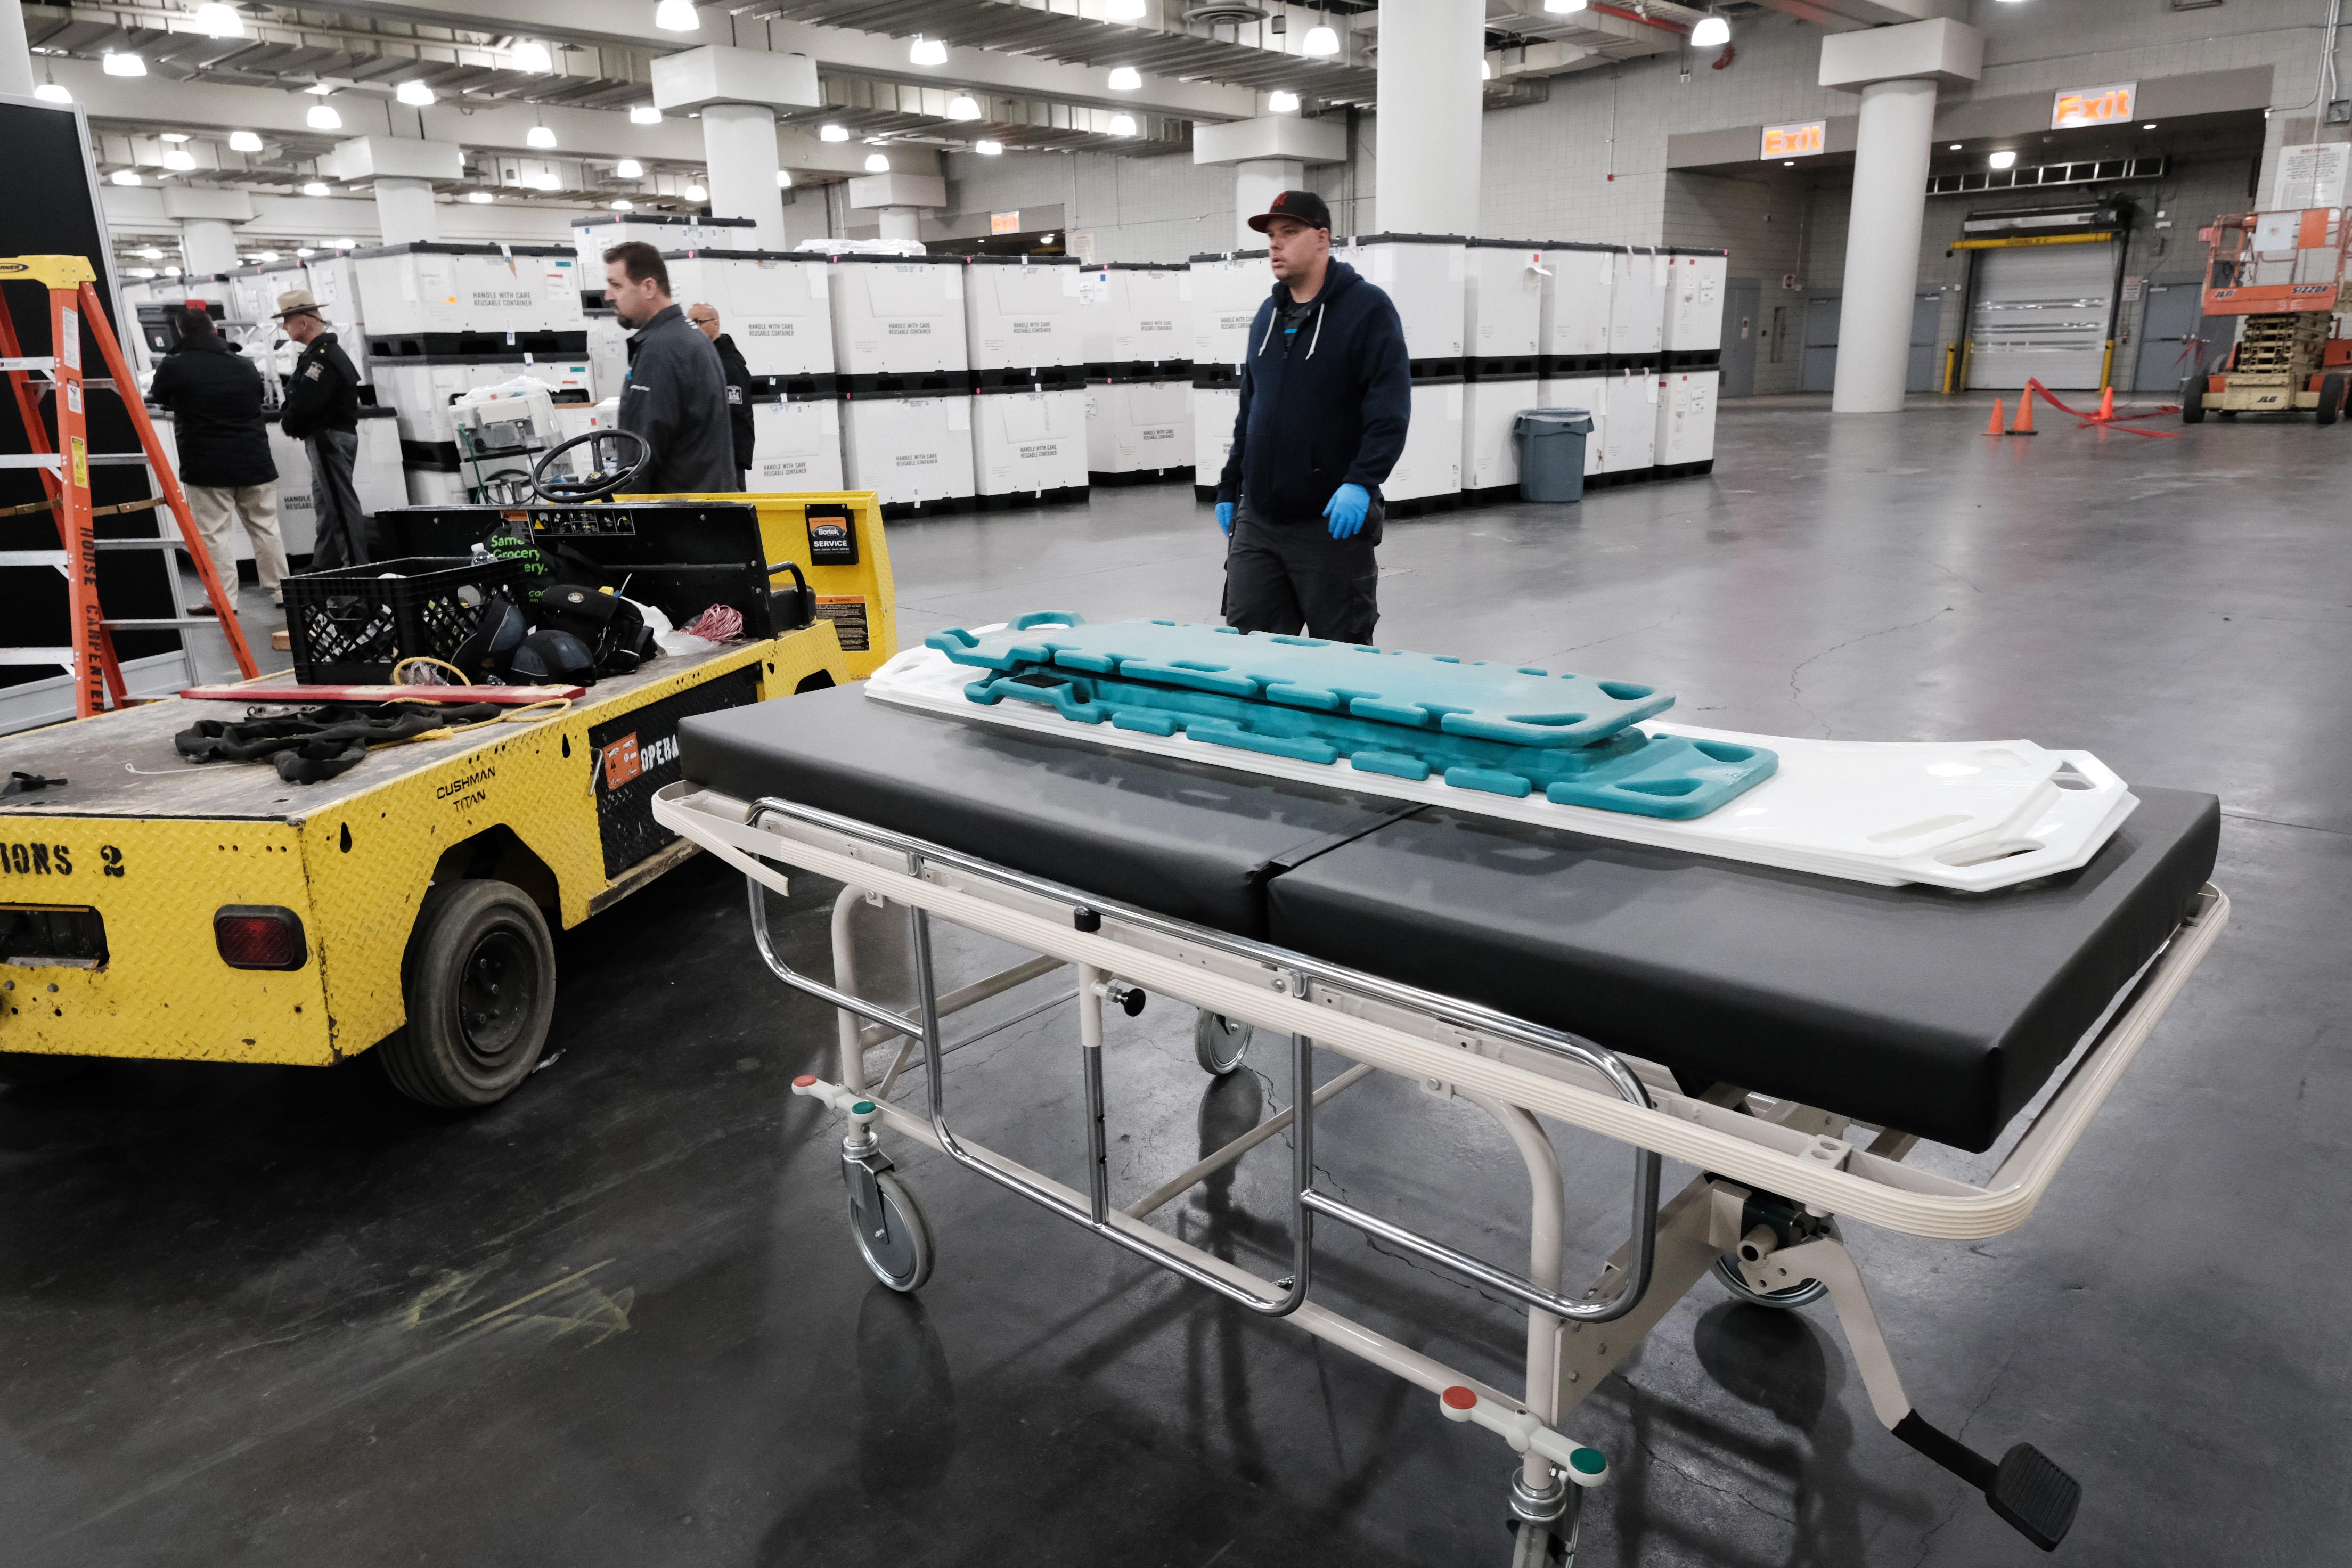 Workers load medical beds and other supplies into the Javits Center.